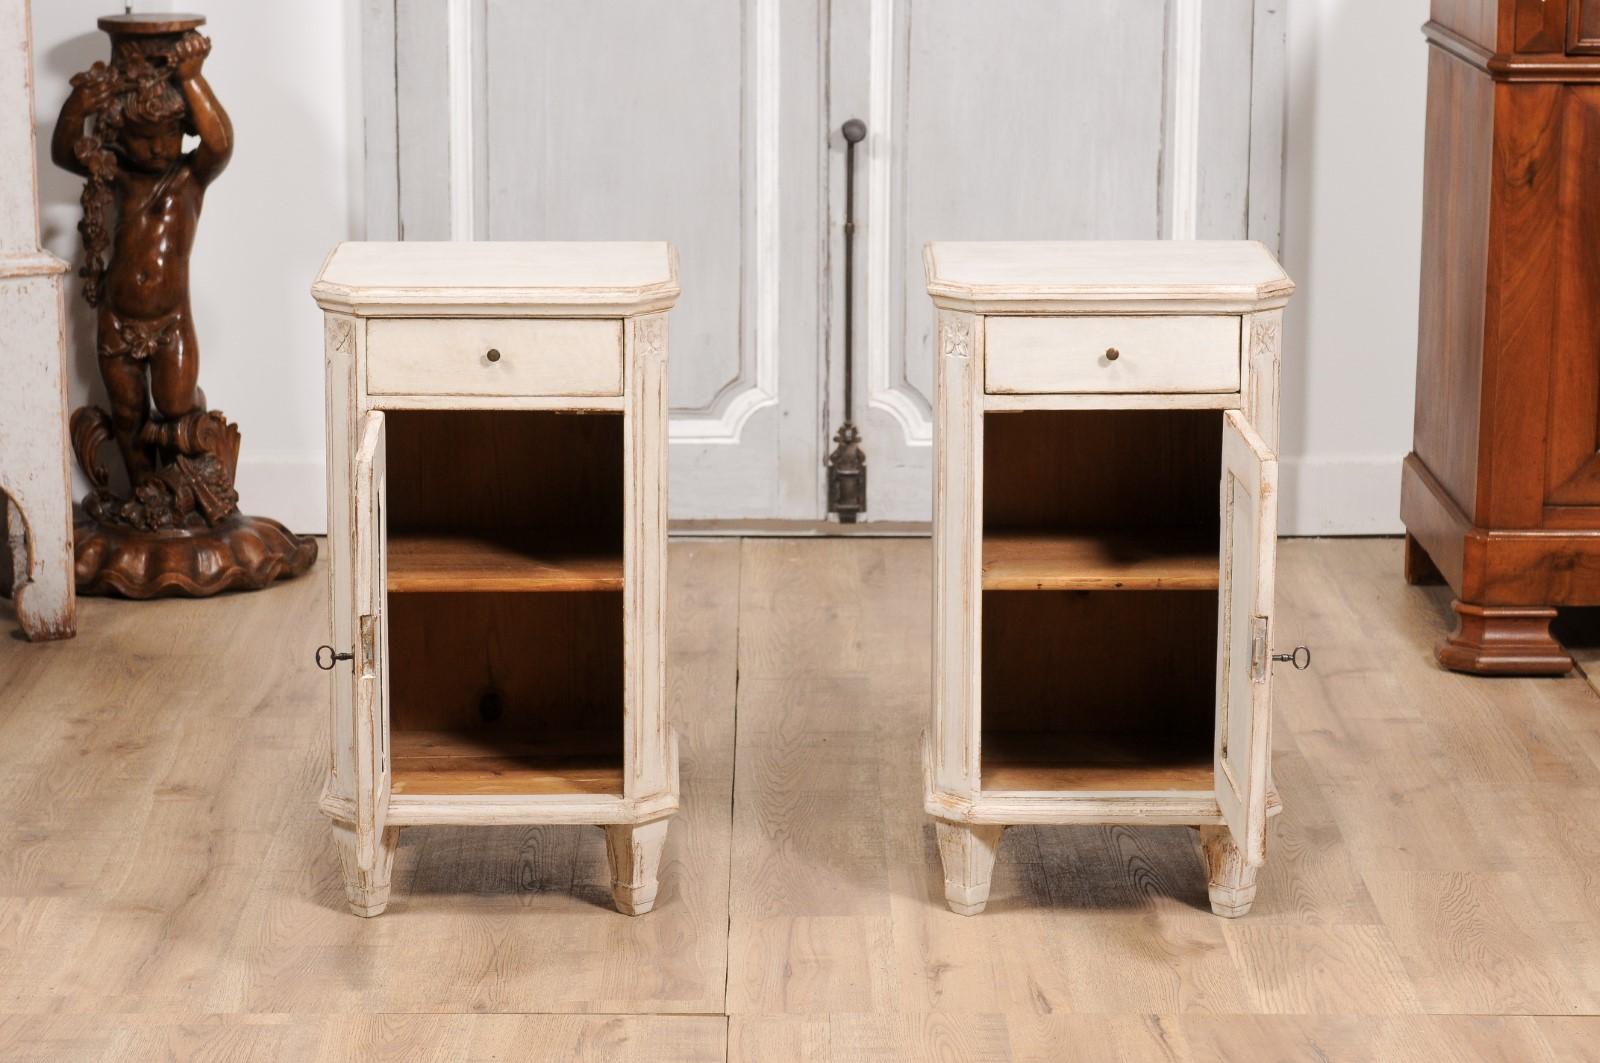 19th Century Swedish Gustavian 1880s Light Gray Nightstands with Drawers and Doors, a Pair For Sale